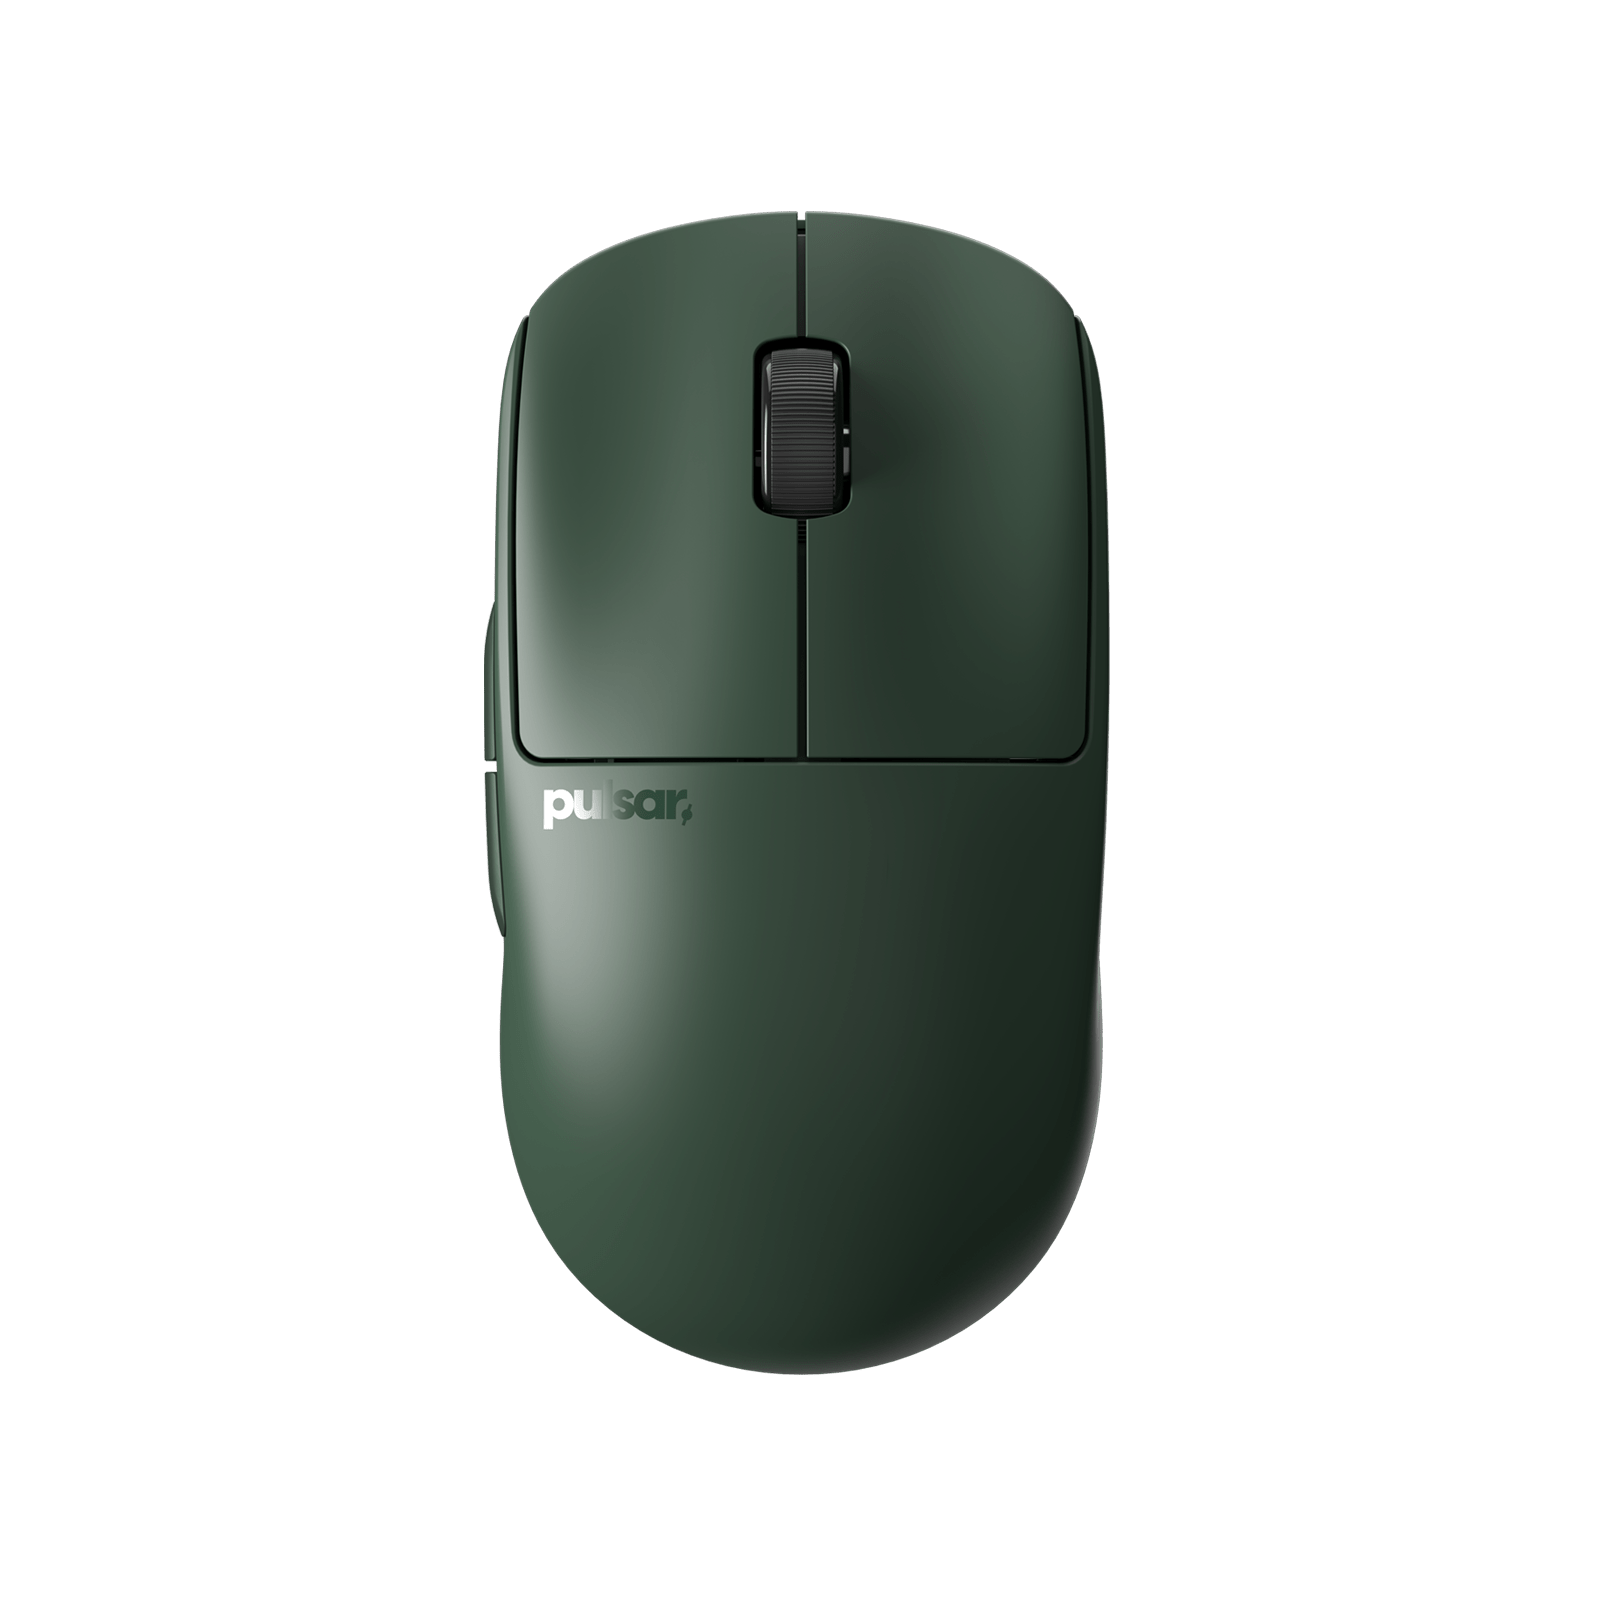 Founder's Edition] X2V2 Gaming Mouse – Pulsar Gaming Gears Japan